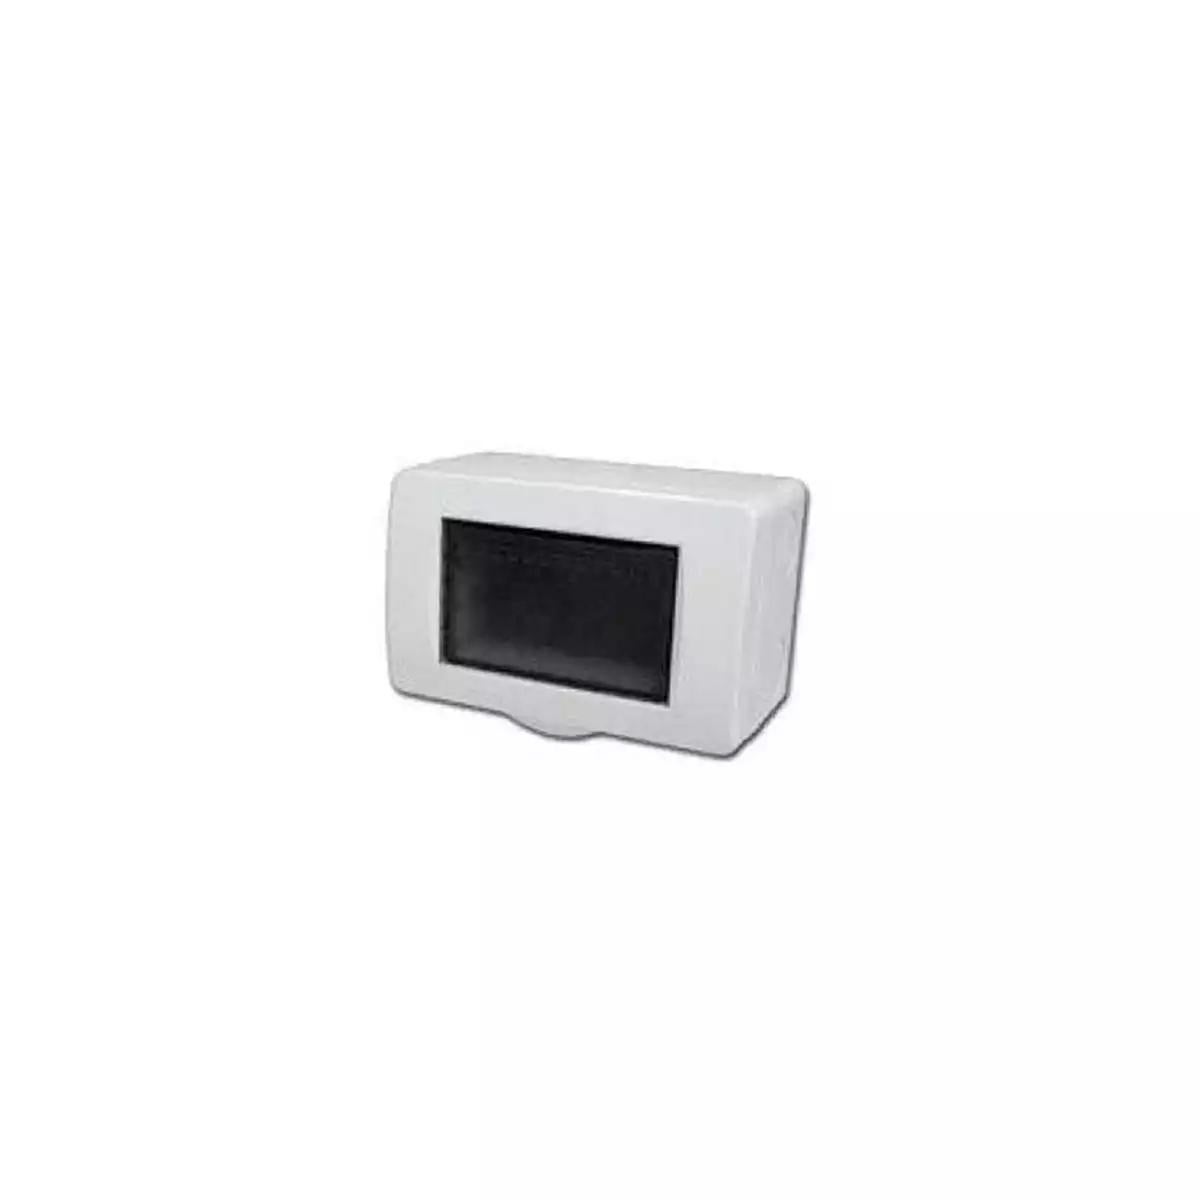 S-Flexi - weatherproof cover with wall box - white